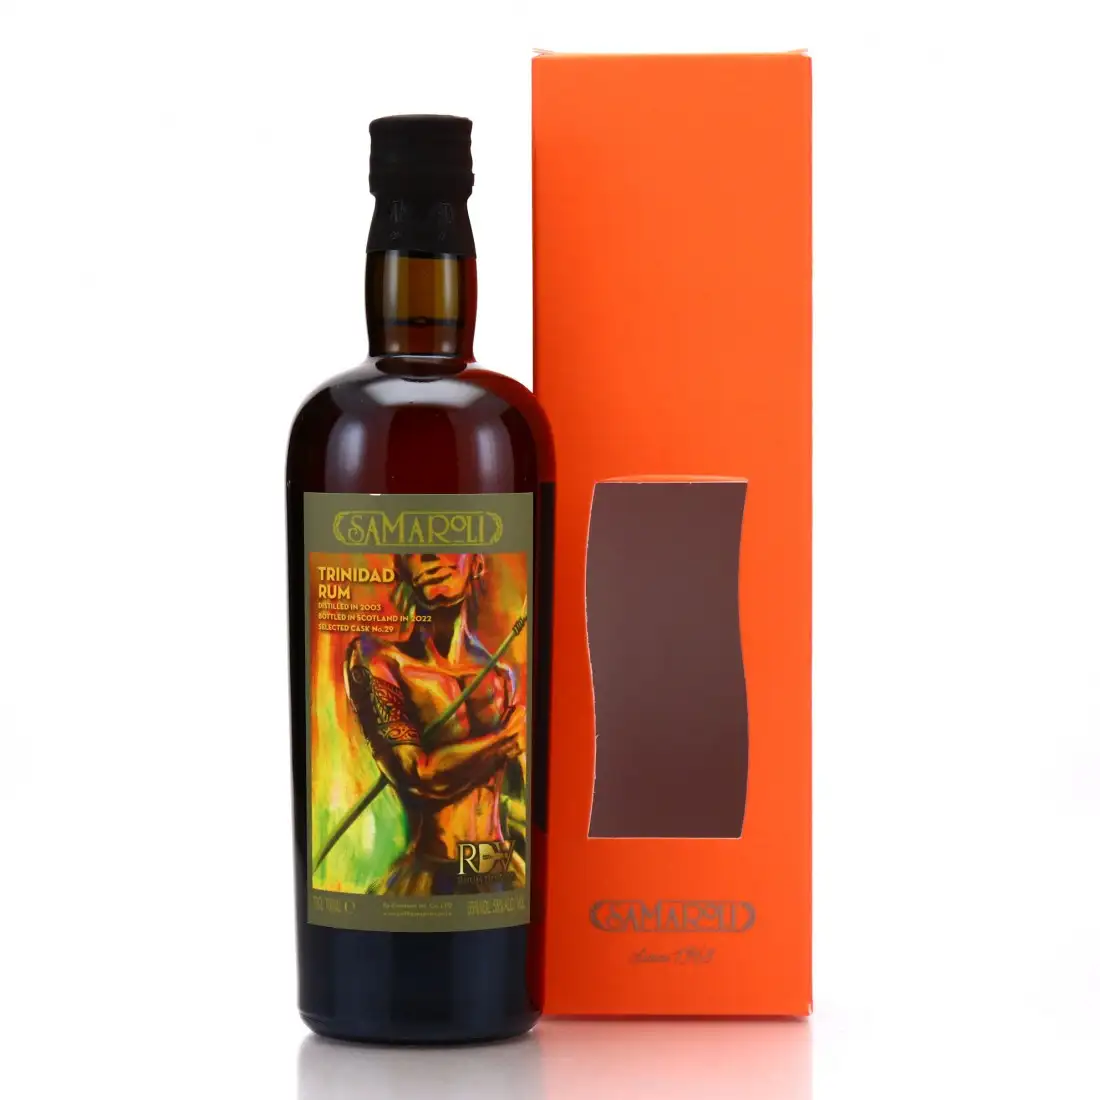 Image of the front of the bottle of the rum Fernandes